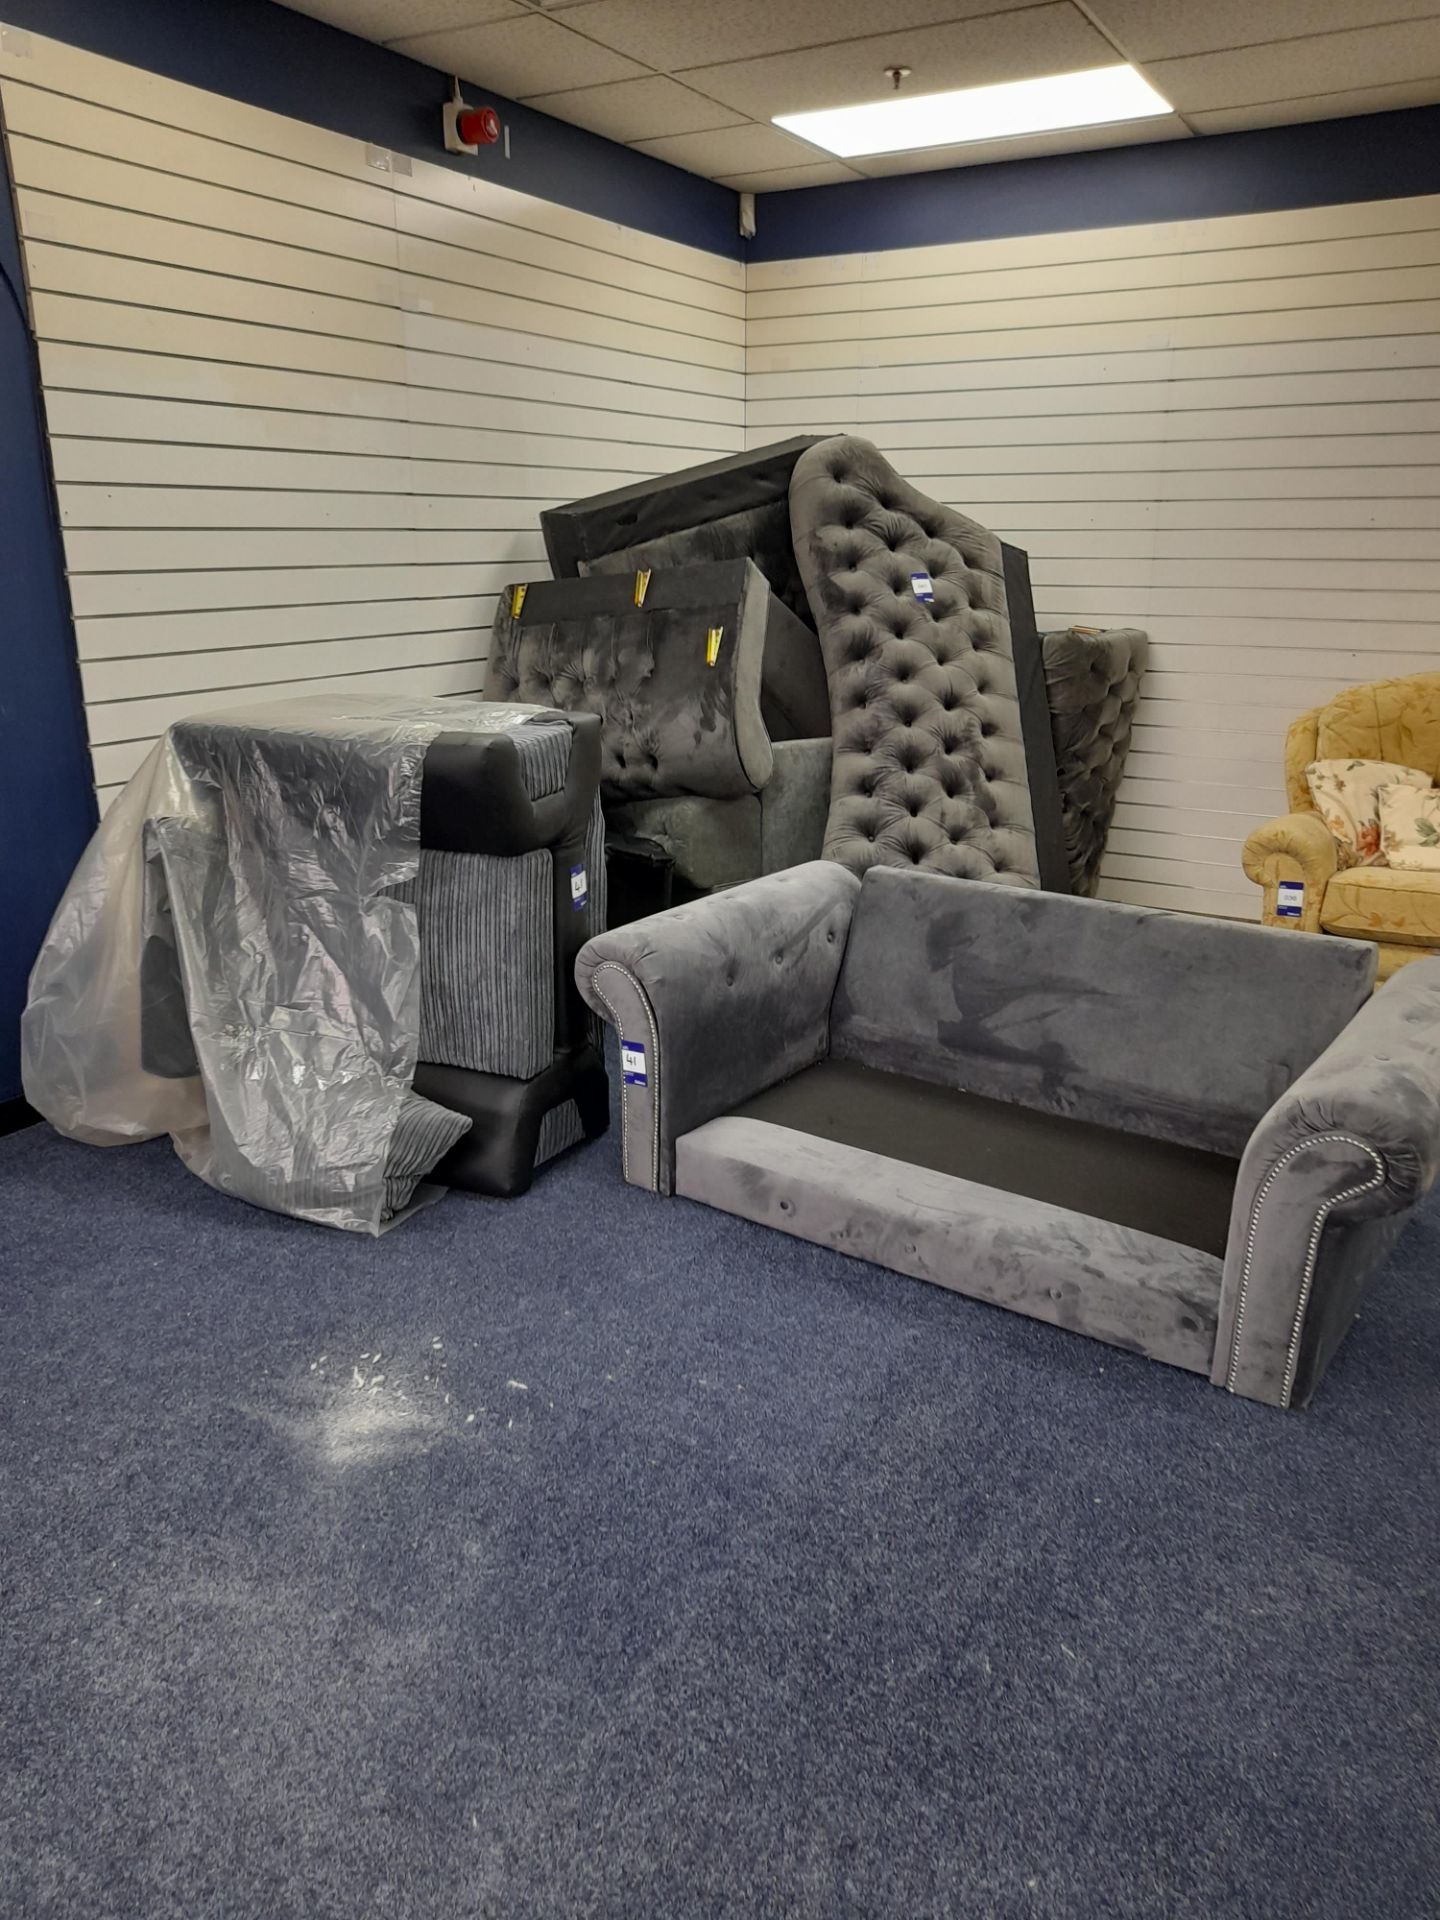 Quantity of incomplete sofas, armchairs etc. (no feet or cushions, or only parts), and large